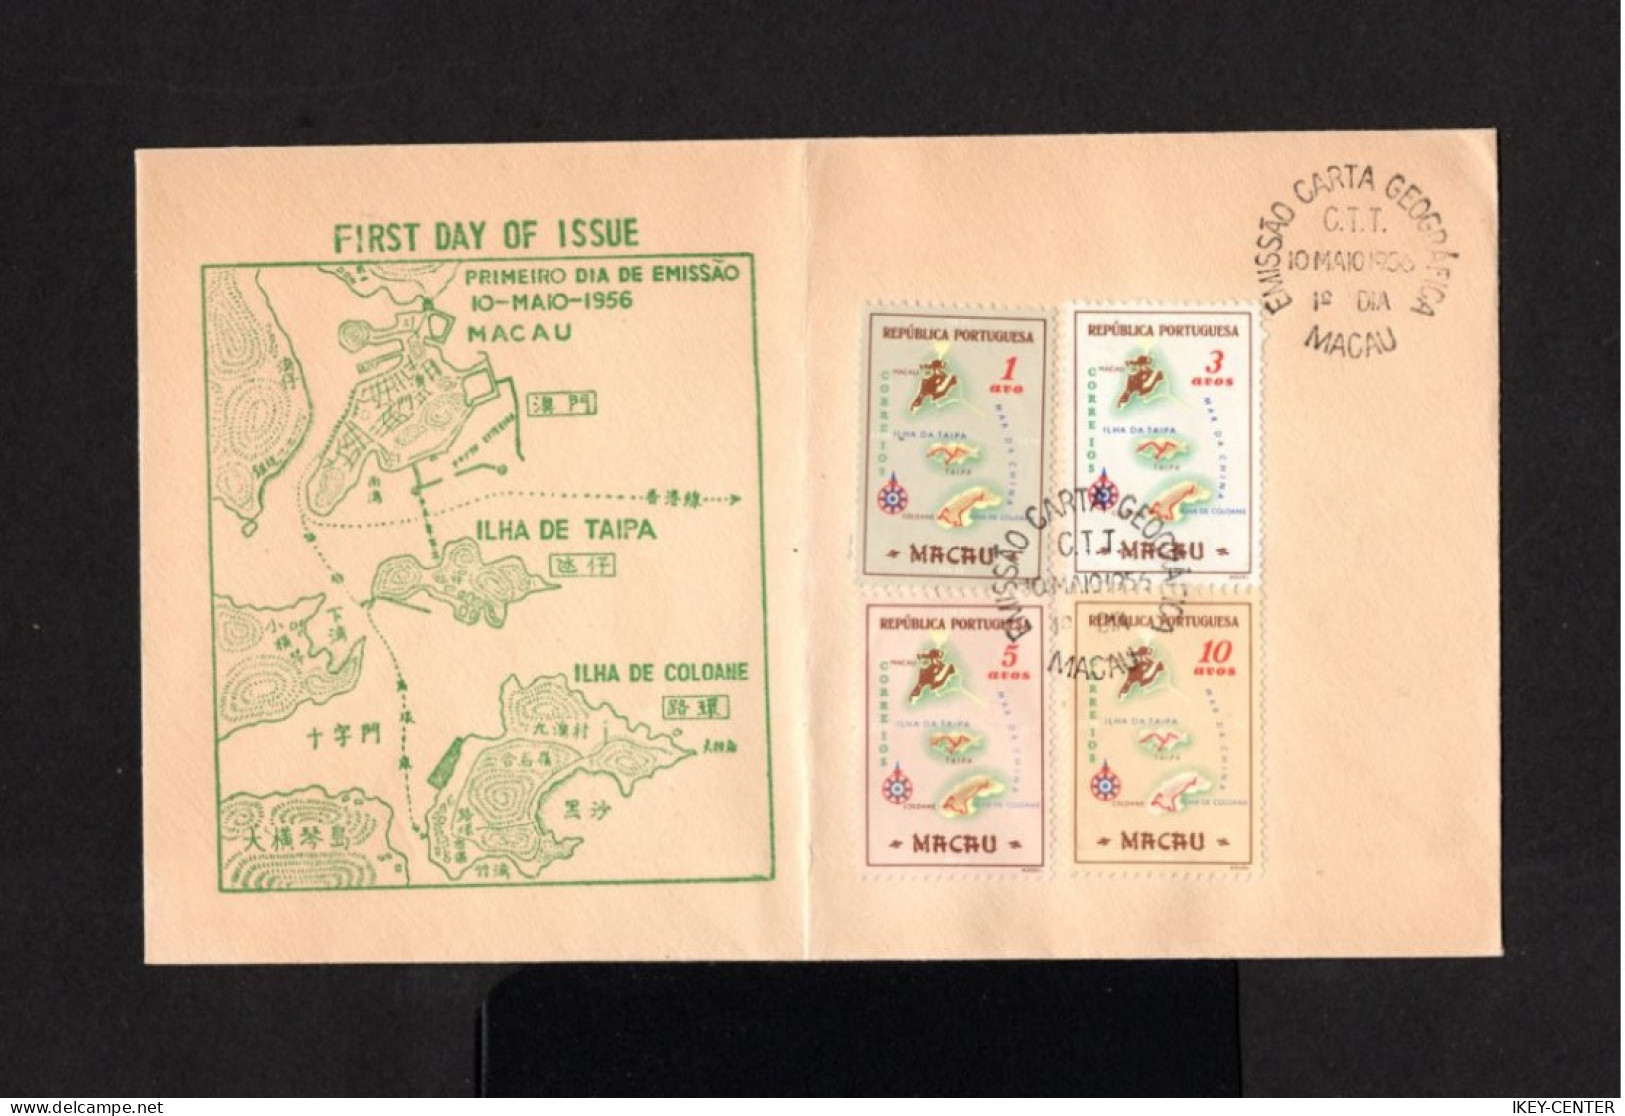 15100-MACAU-CHINA-FIRST DAY COVER MACAO.1956.SOBRE 1º Dia.ENVELOPPE Premier Jour.Brief.FDC. - Covers & Documents